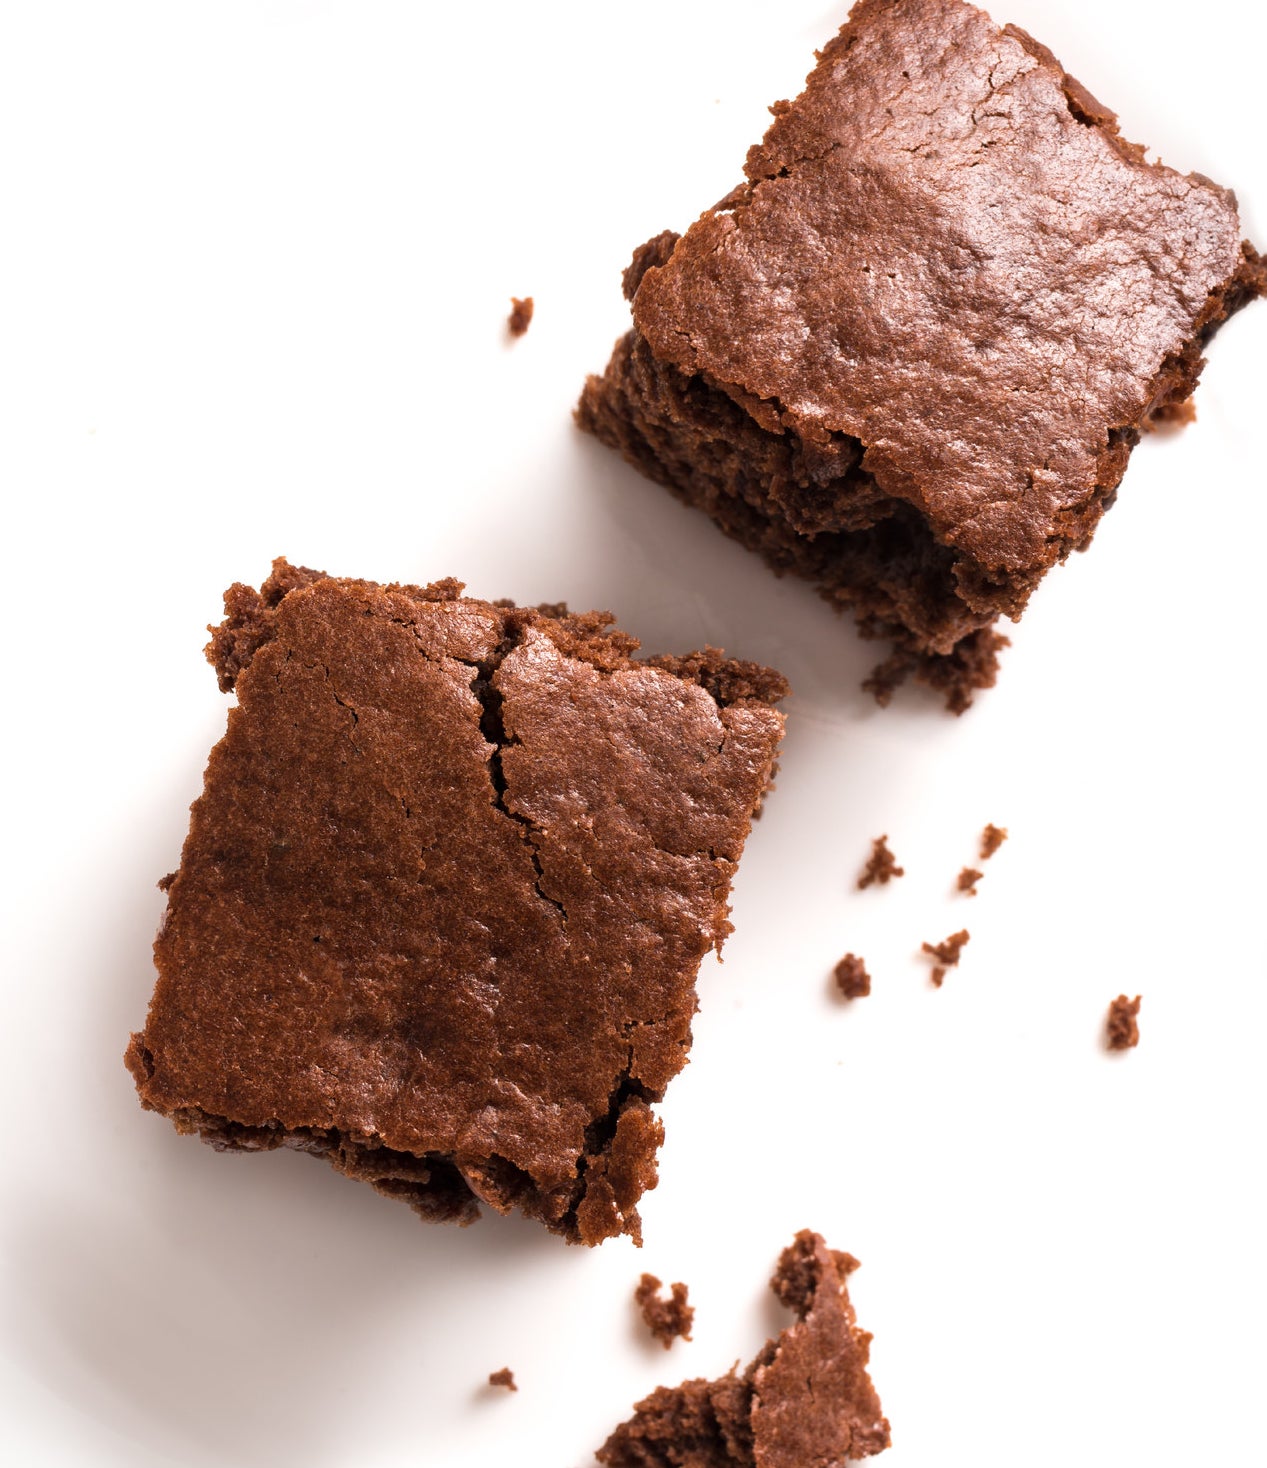 Two brownies on a white background.